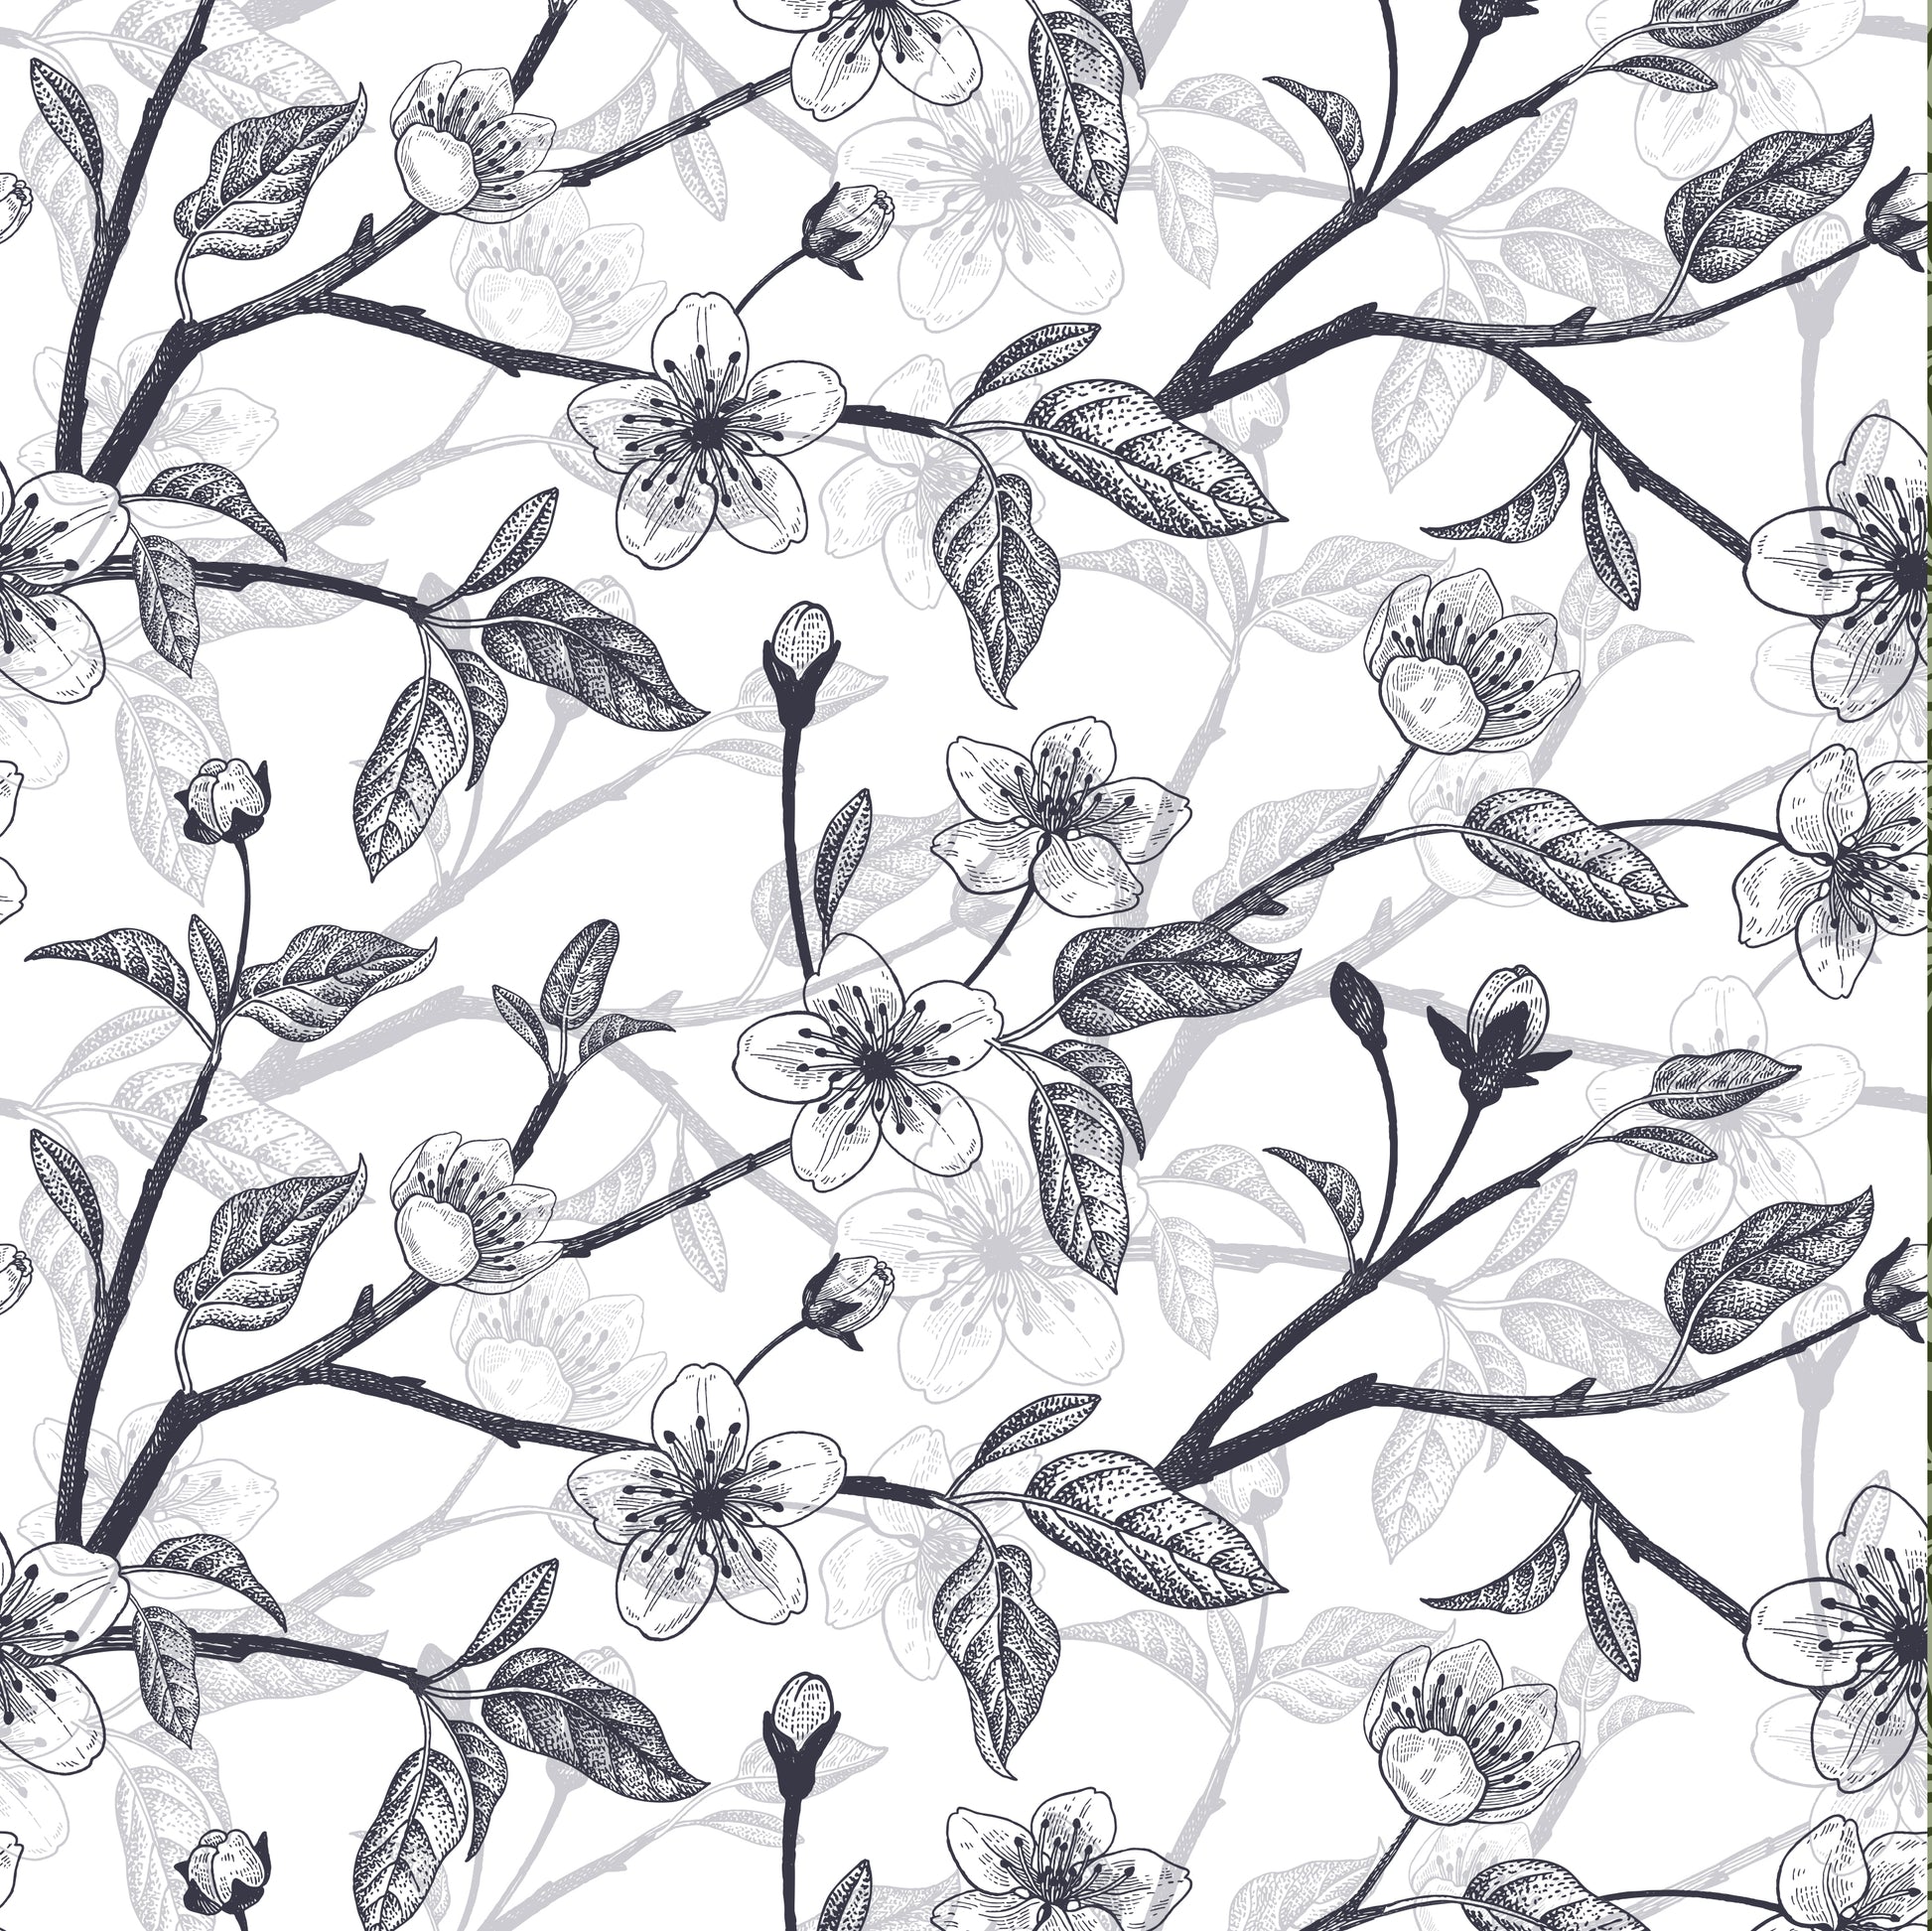 Black and white cherry Blossom wallpaper swatch